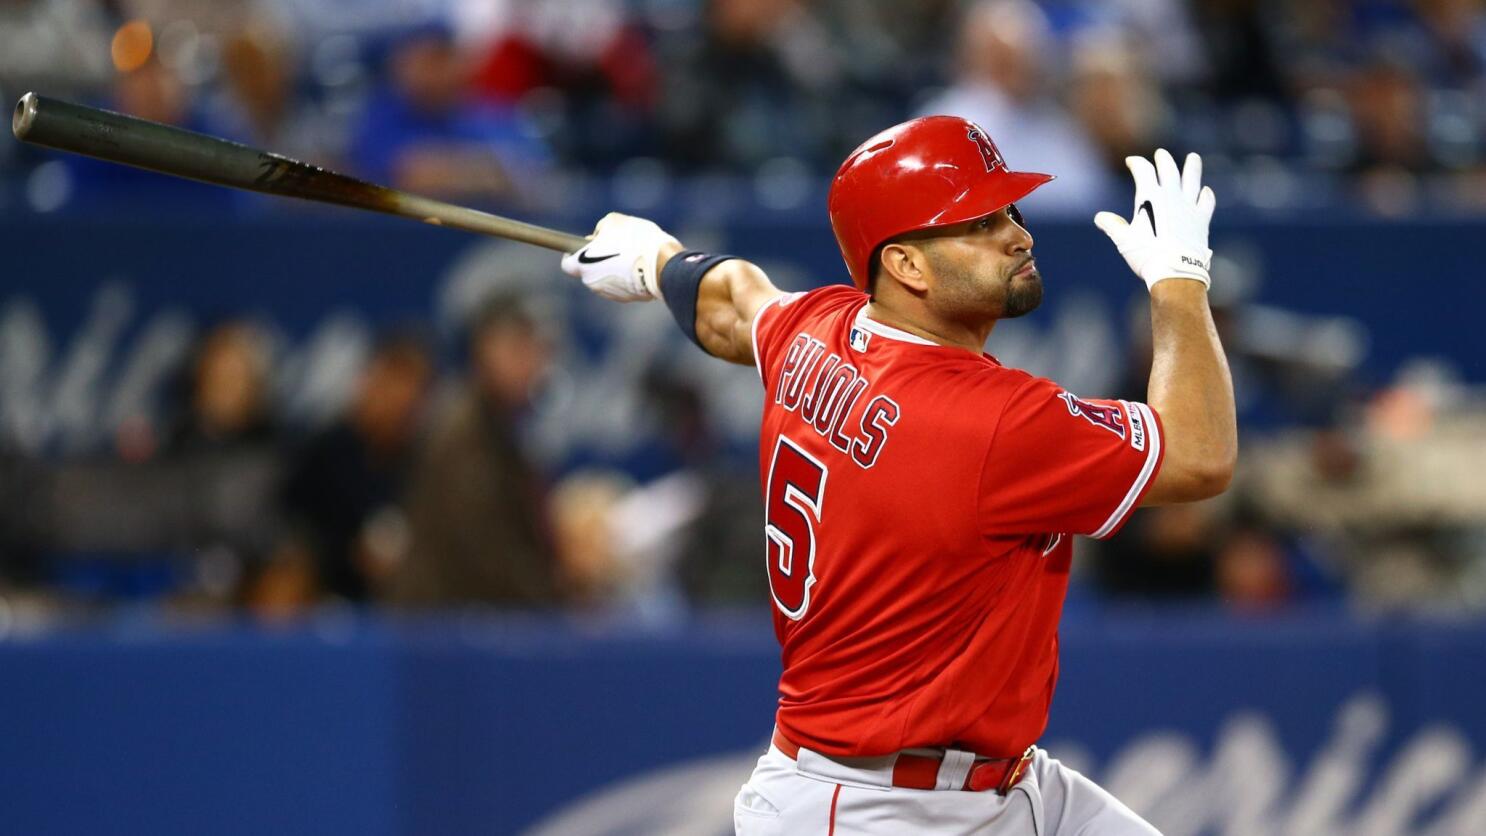 Angels' Albert Pujols excited to play in St. Louis this weekend